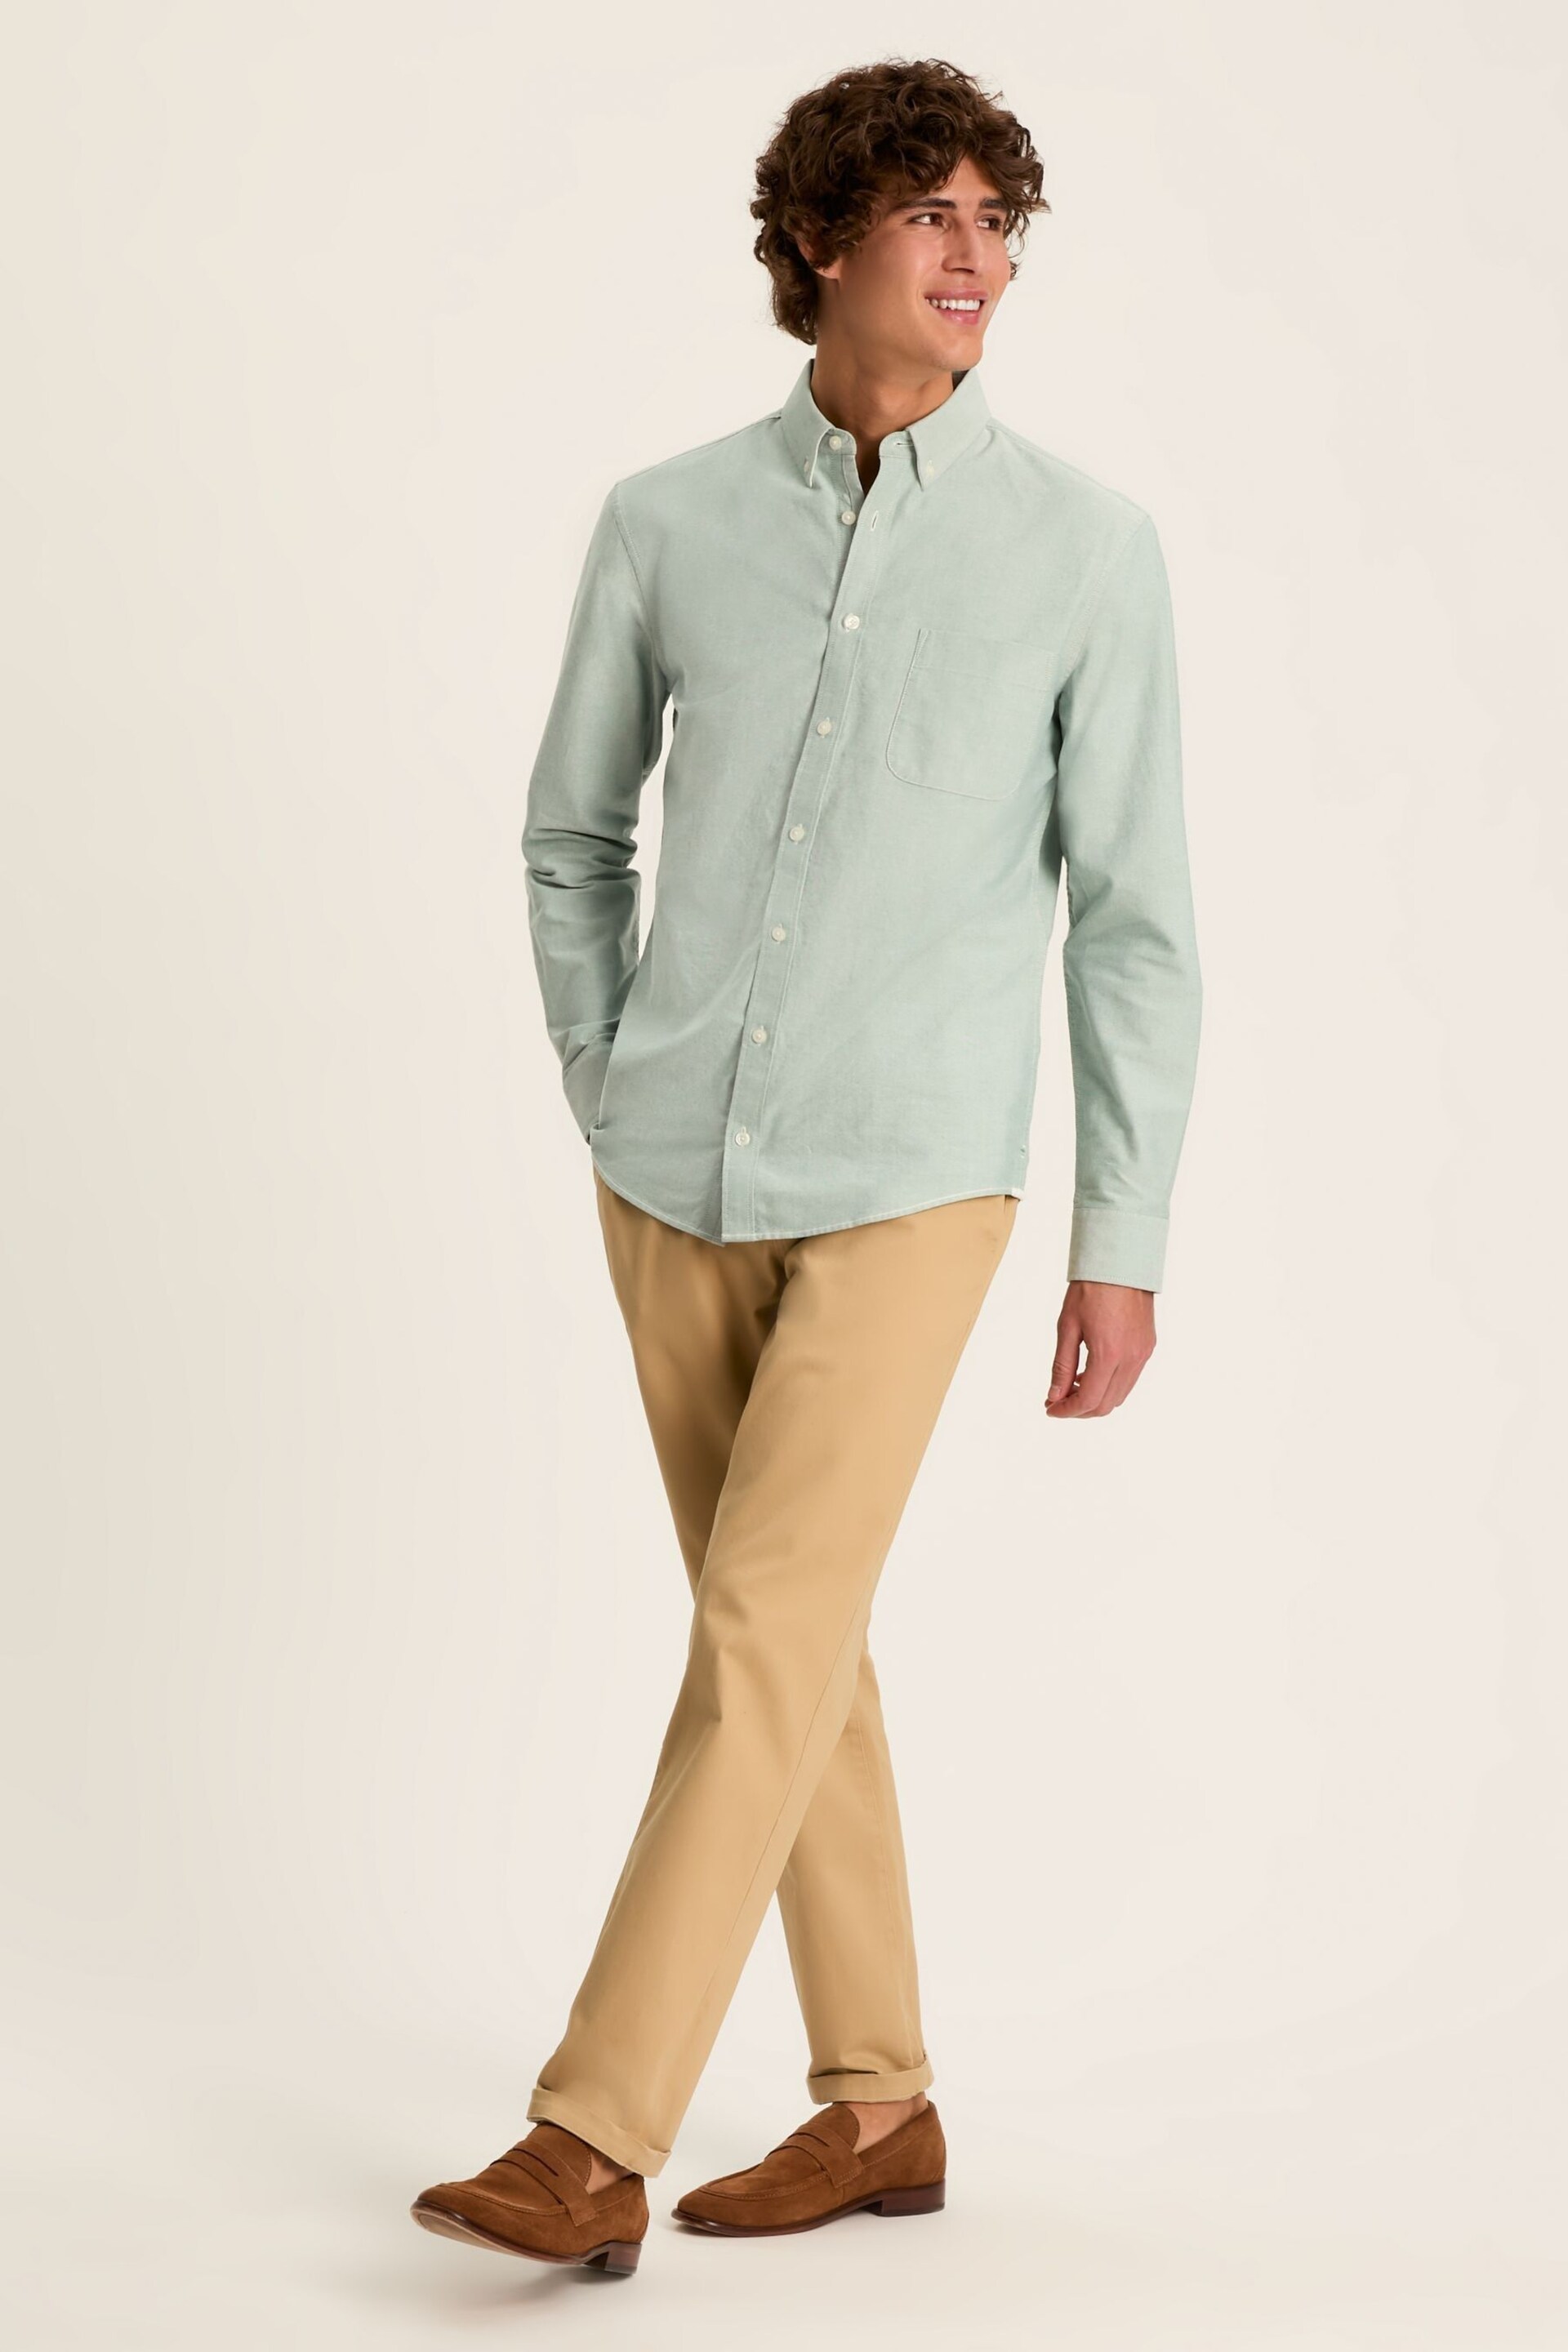 Joules Oxford Sage Green Long Sleeve Classic Fit Shirt - Image 4 of 12